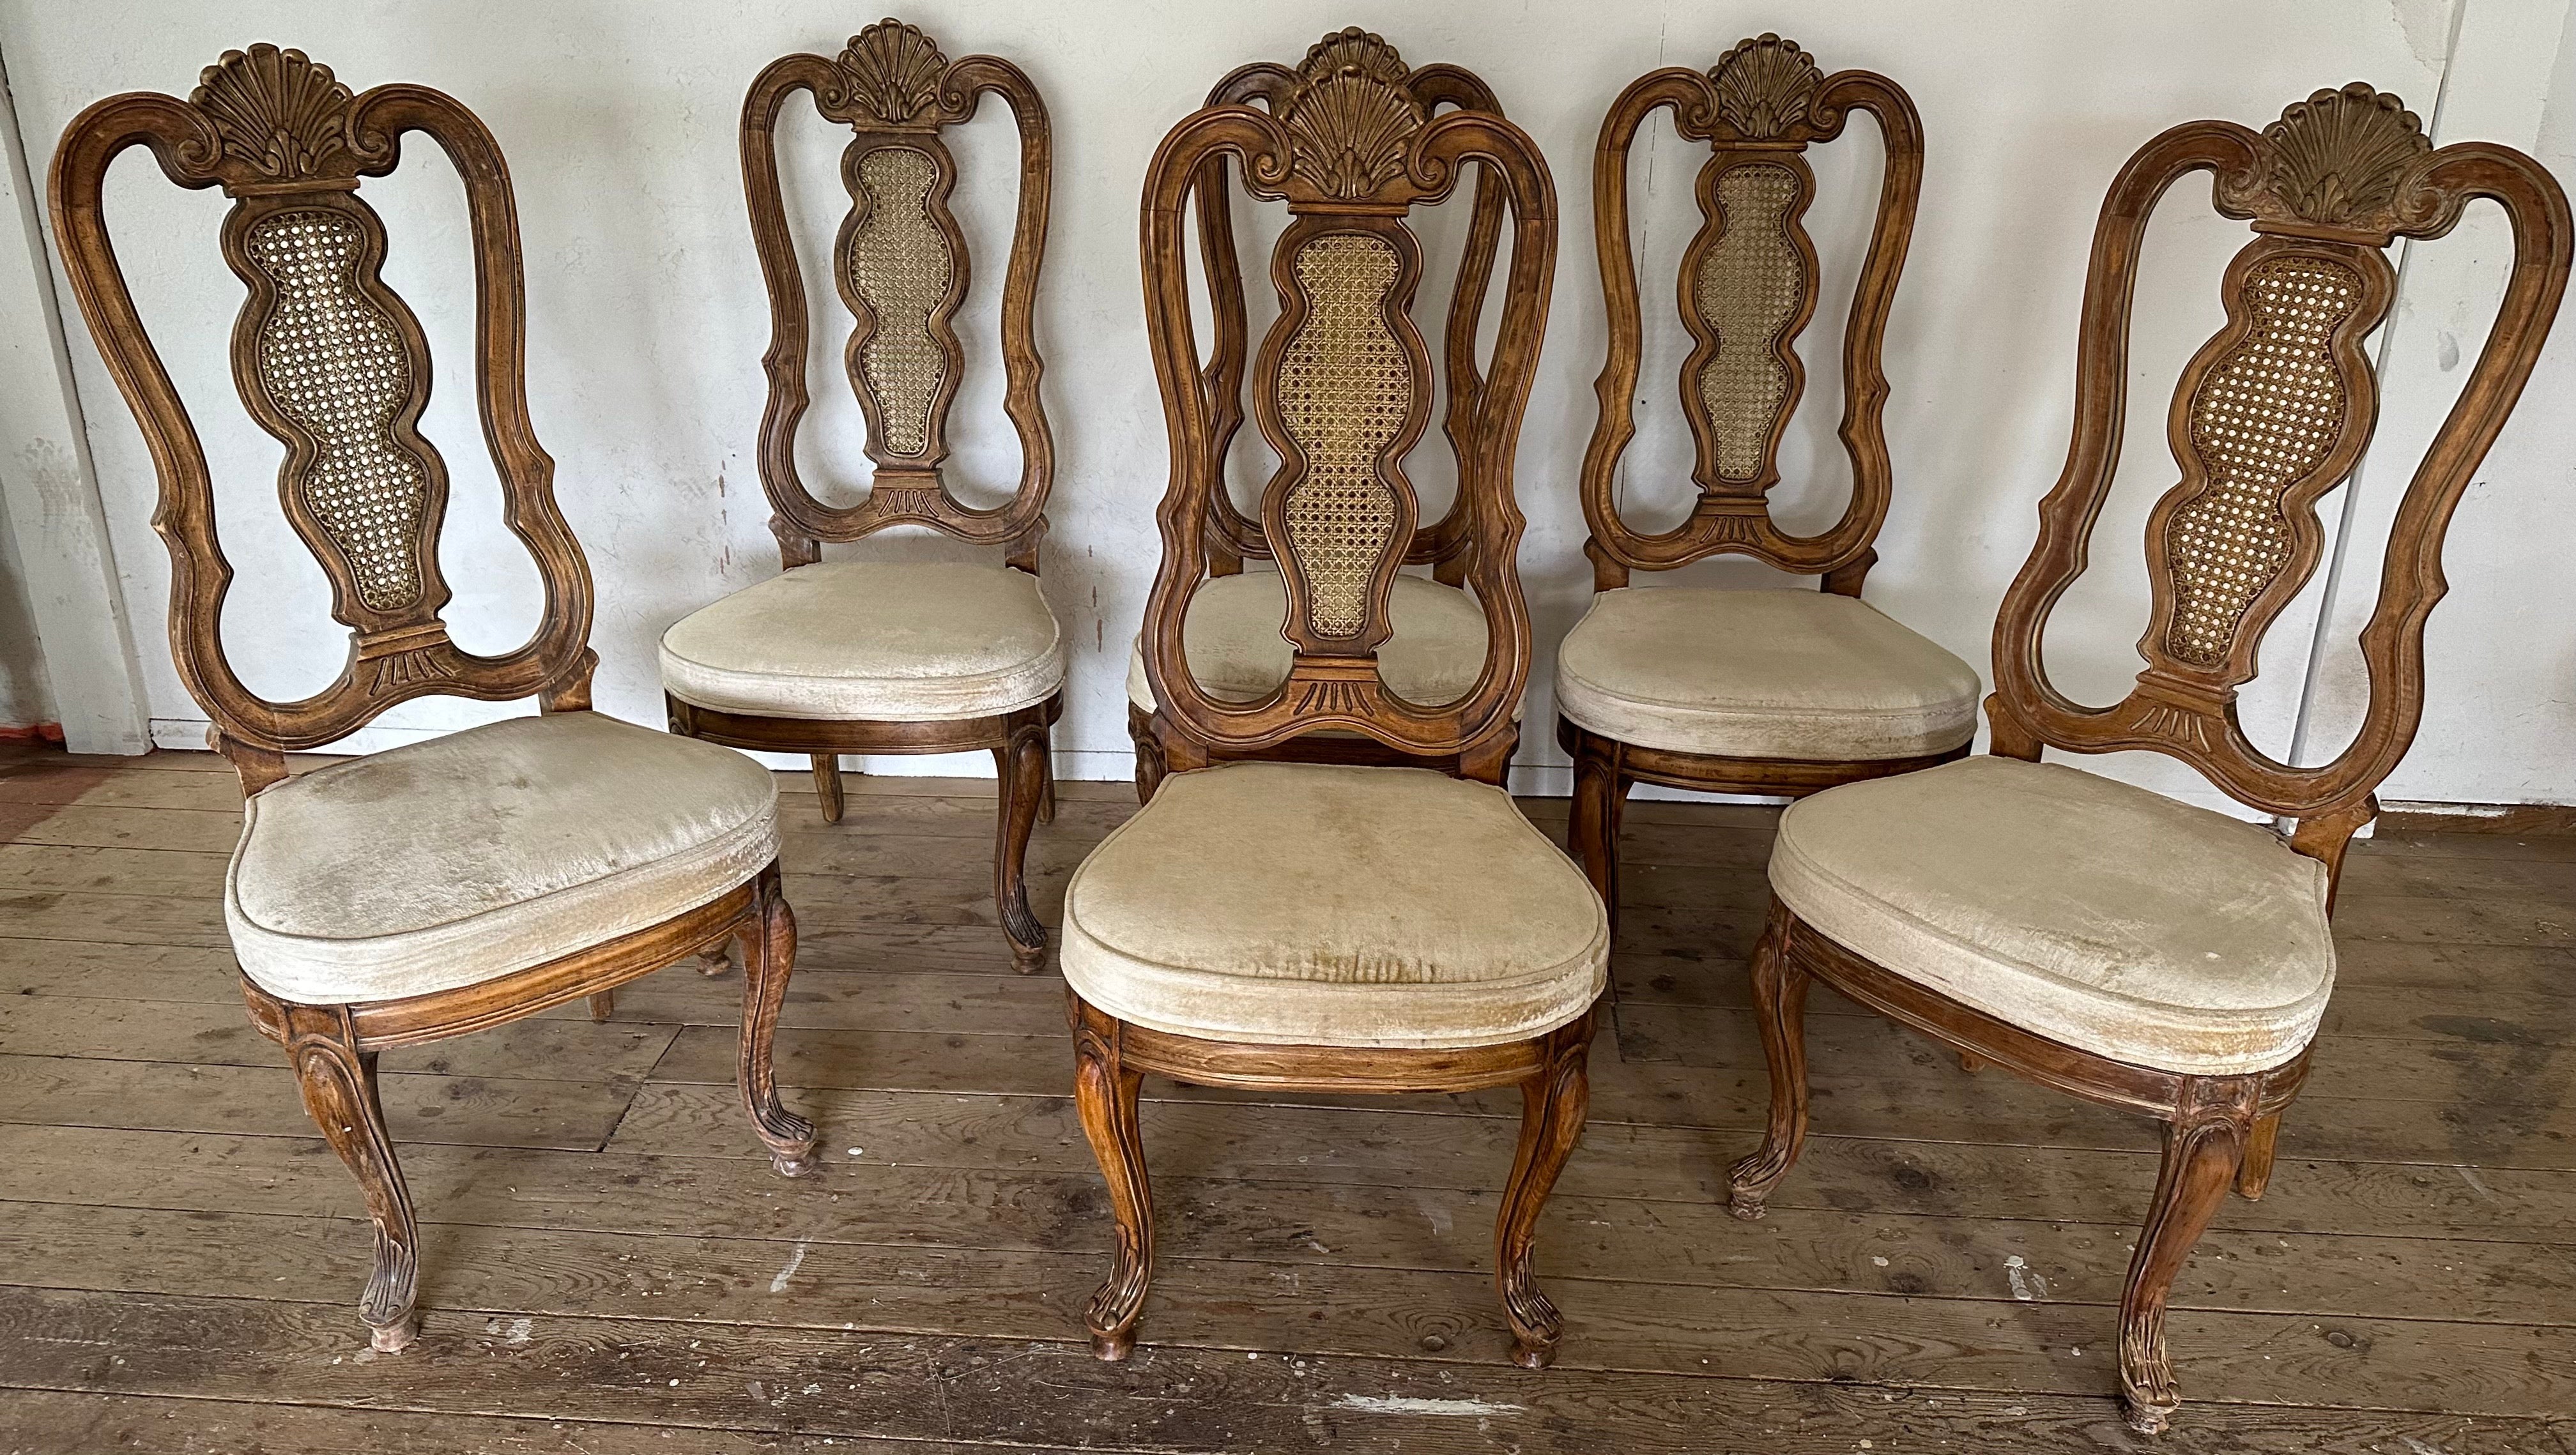 A special set of 6 carved wood Italian baroque or Swedish Rococo style dining chairs, upholstered in  textured cream fabric, carved wood detail on  back & legs, featuring tall shapely inset woven cane backs, Queen Anne style legs in solid wood